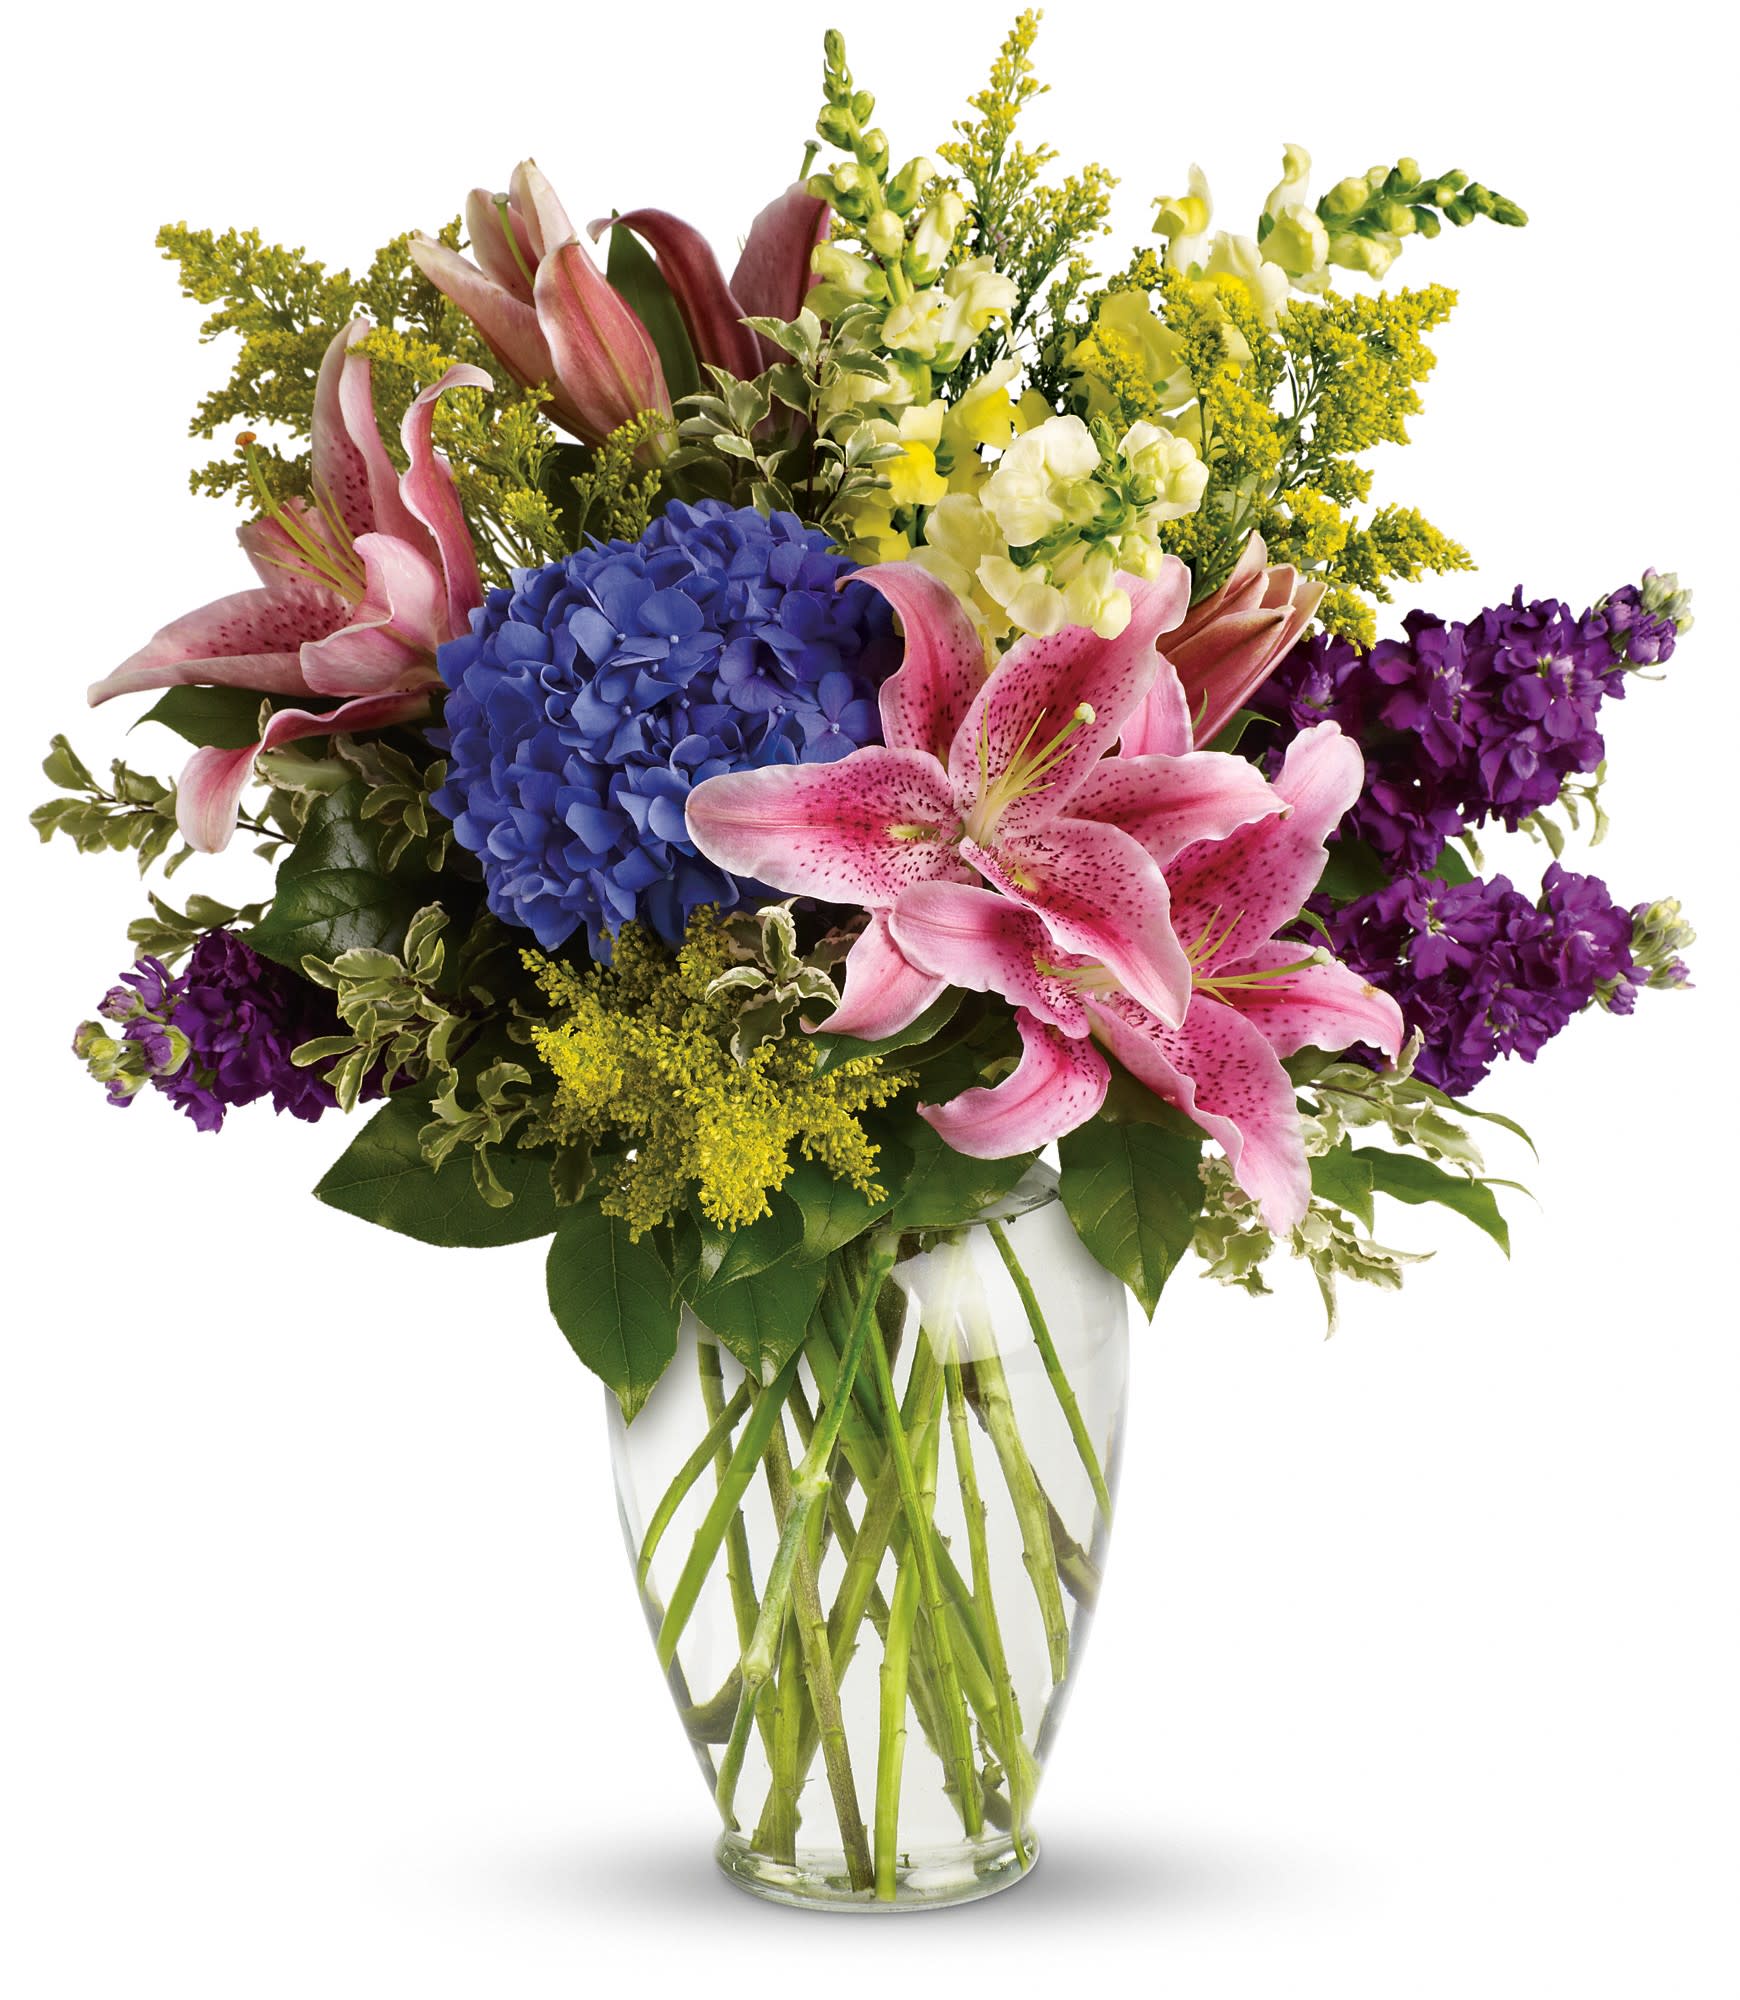 Love Everlasting Bouquet - Let the family at home know you are thinking of them with this lovely bouquet of pink lilies, blue hydrangea and other floral favorites. It will mean a lot. 